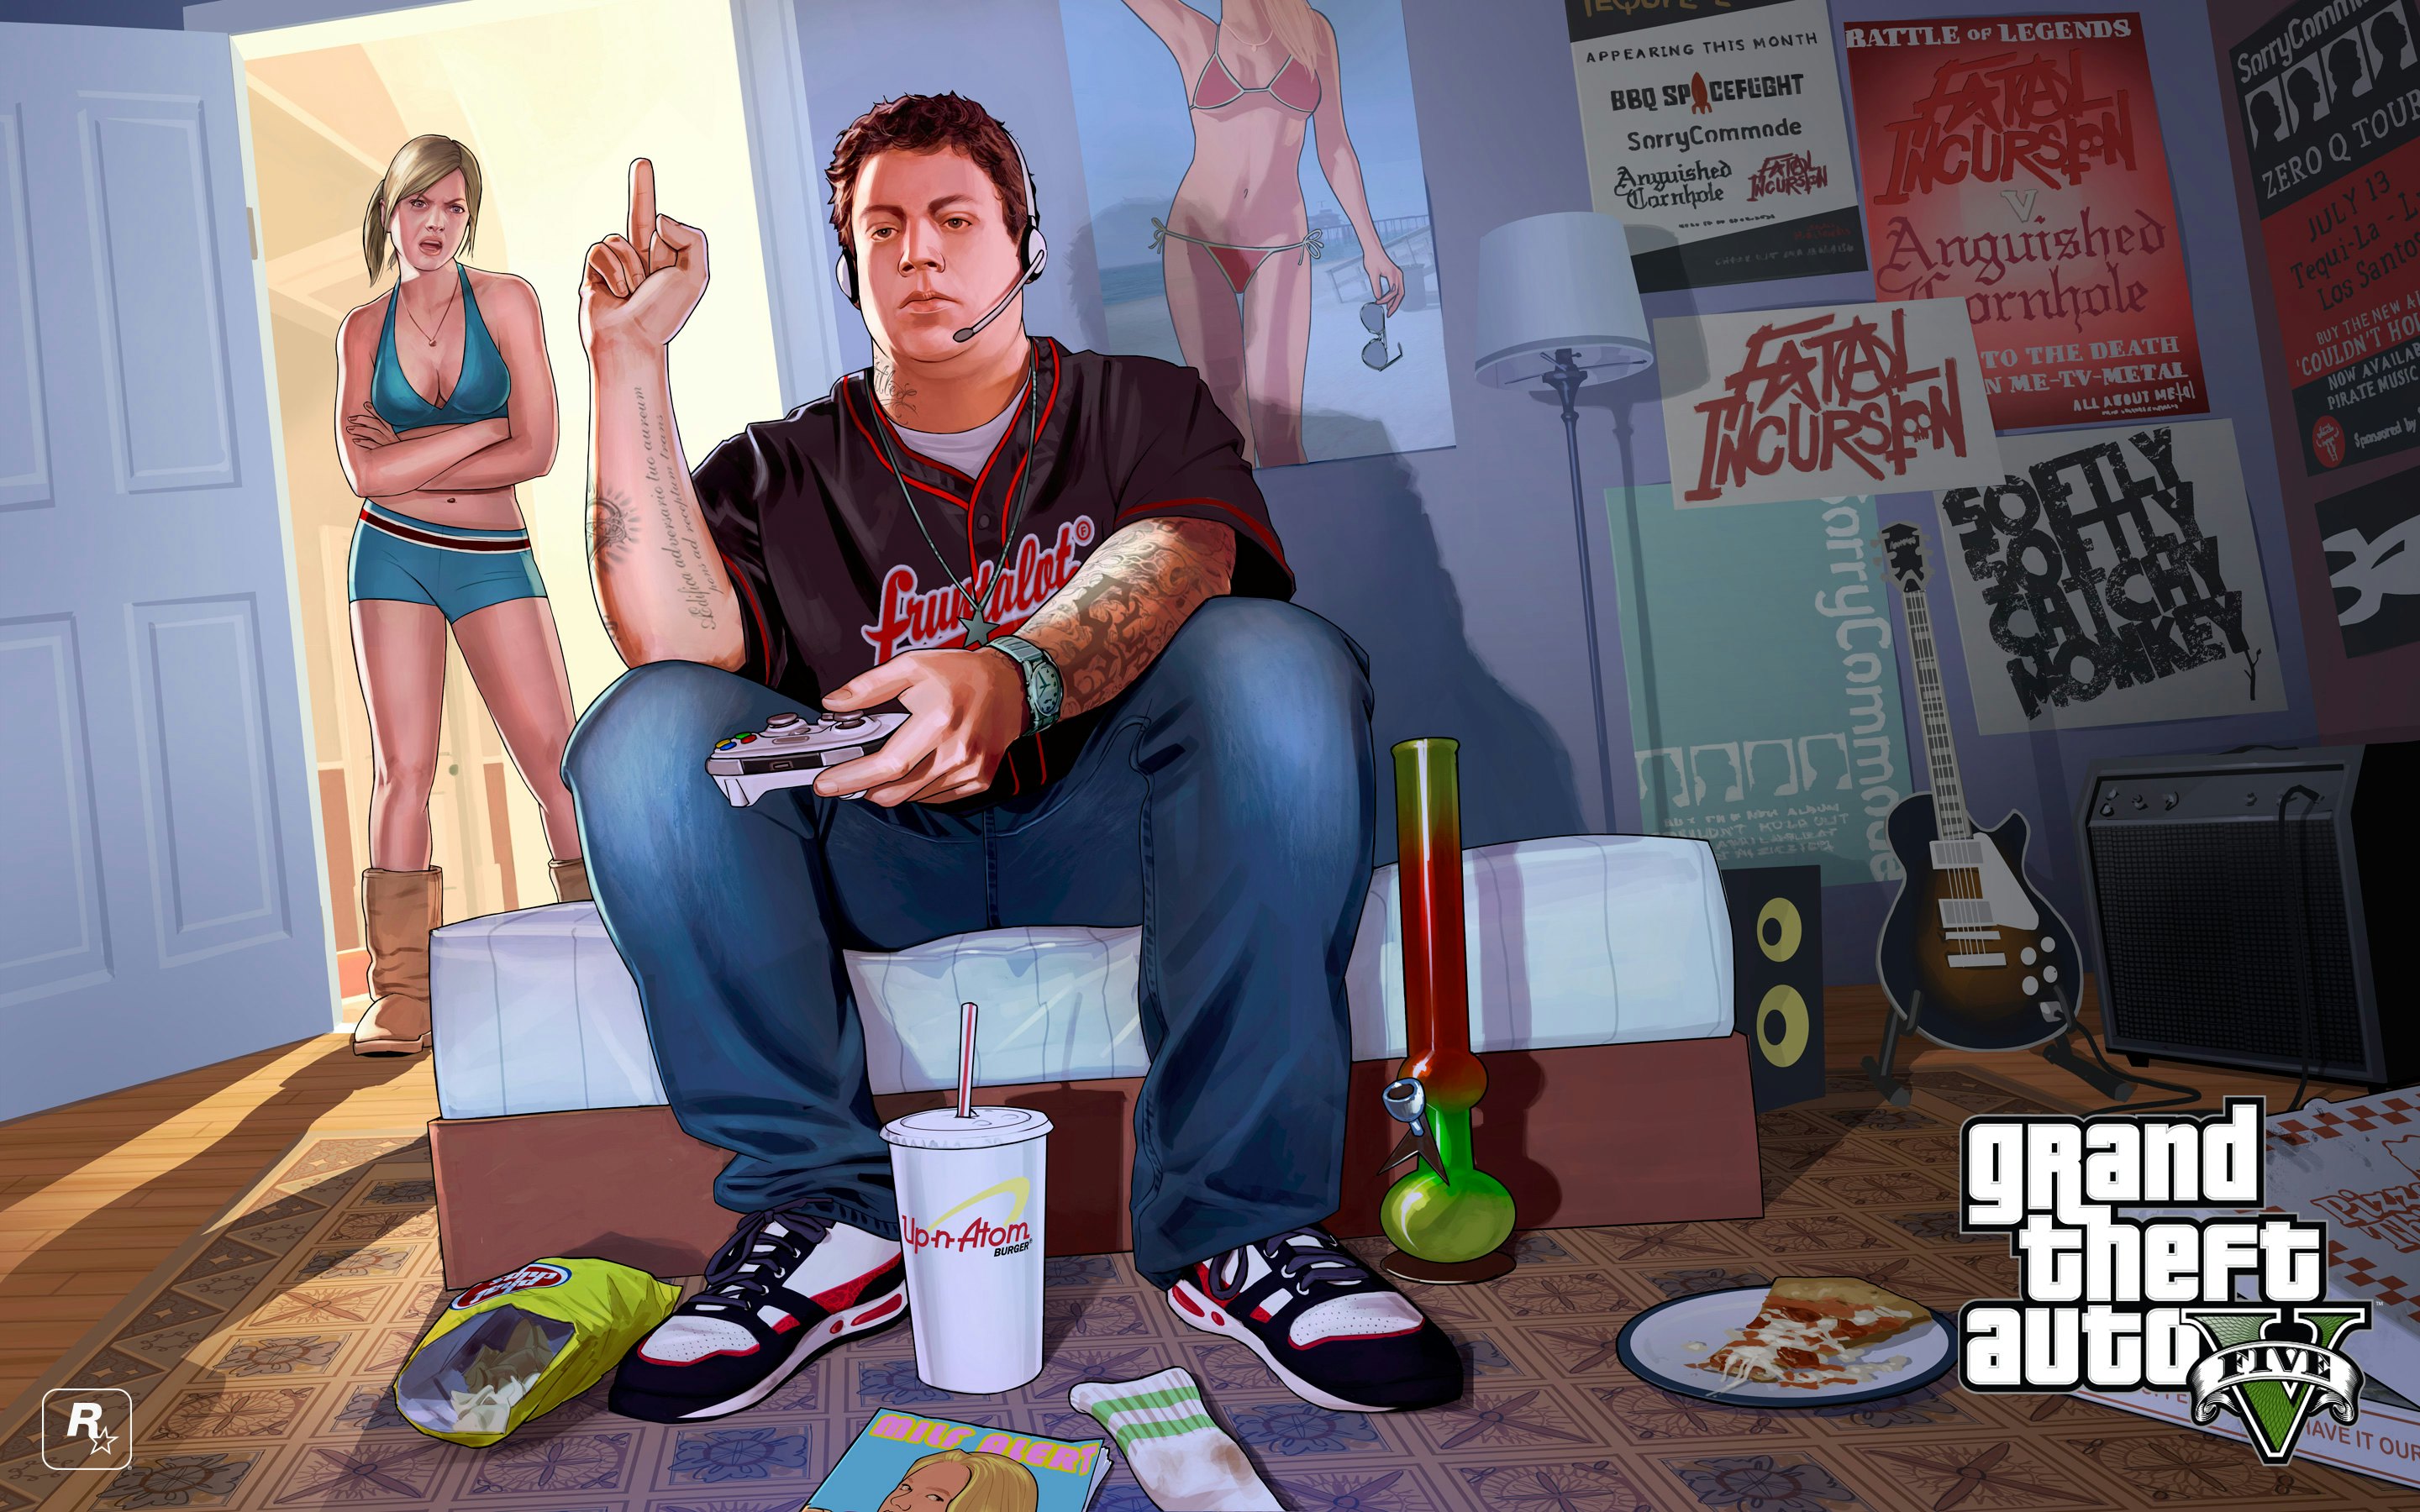 GTA 6: Release Date And Location Rumors About Rockstar's Next Crime  Adventure